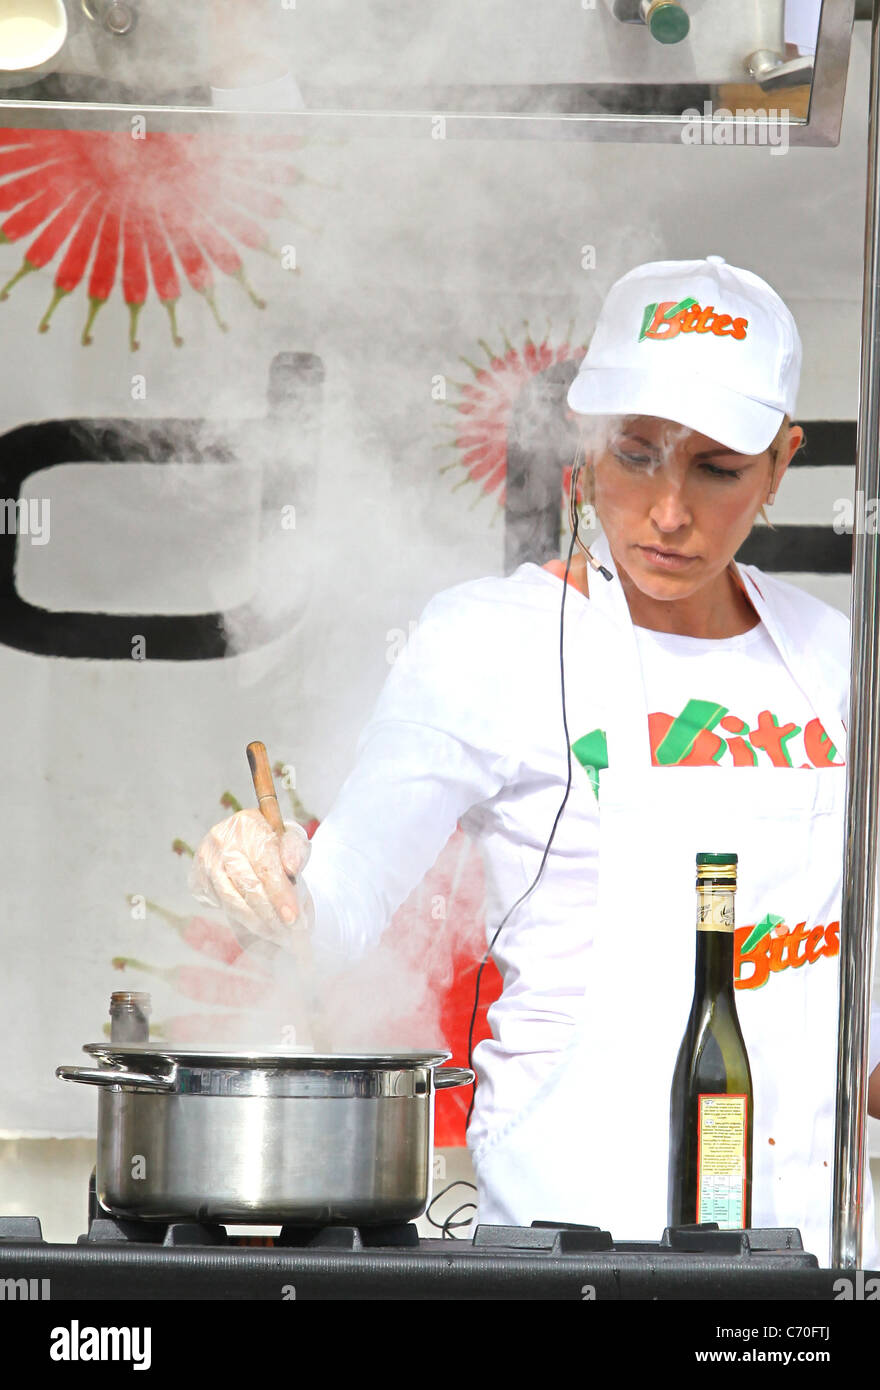 Heather Mills does a cooking demonstration outside a shopping centre Brighton, England - 17.03.10 Stock Photo